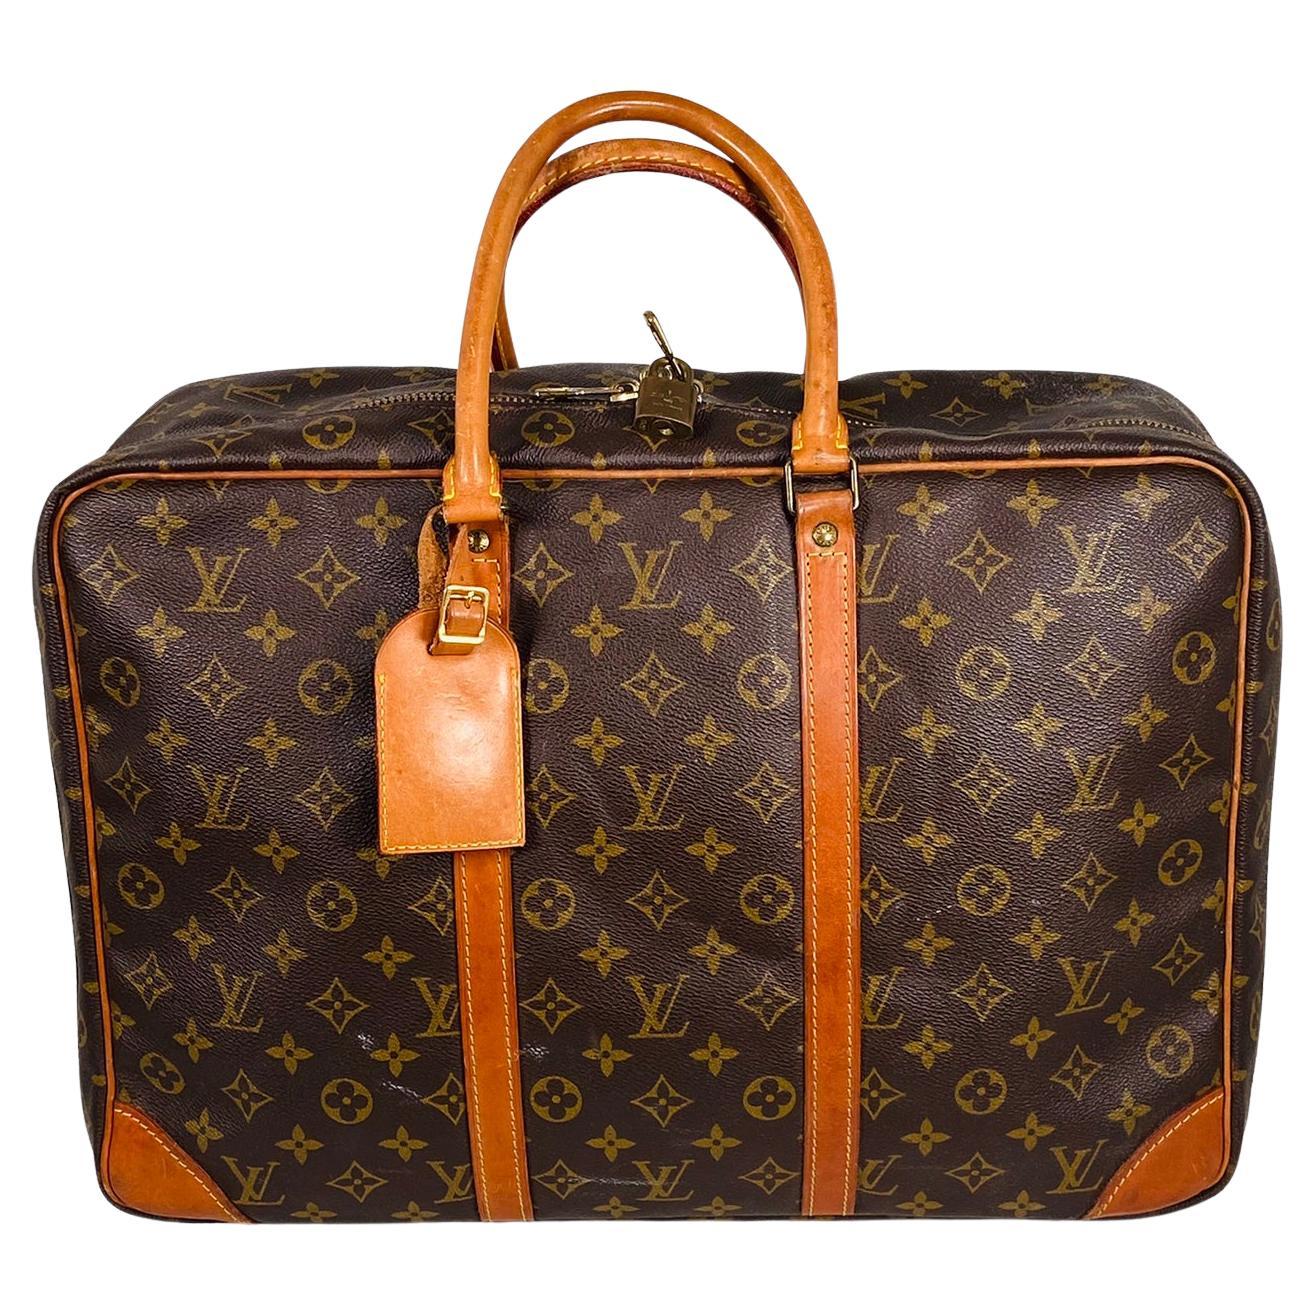 LOUIS VUITTON Sirius 45 Carry On Over Night Travel Bag 